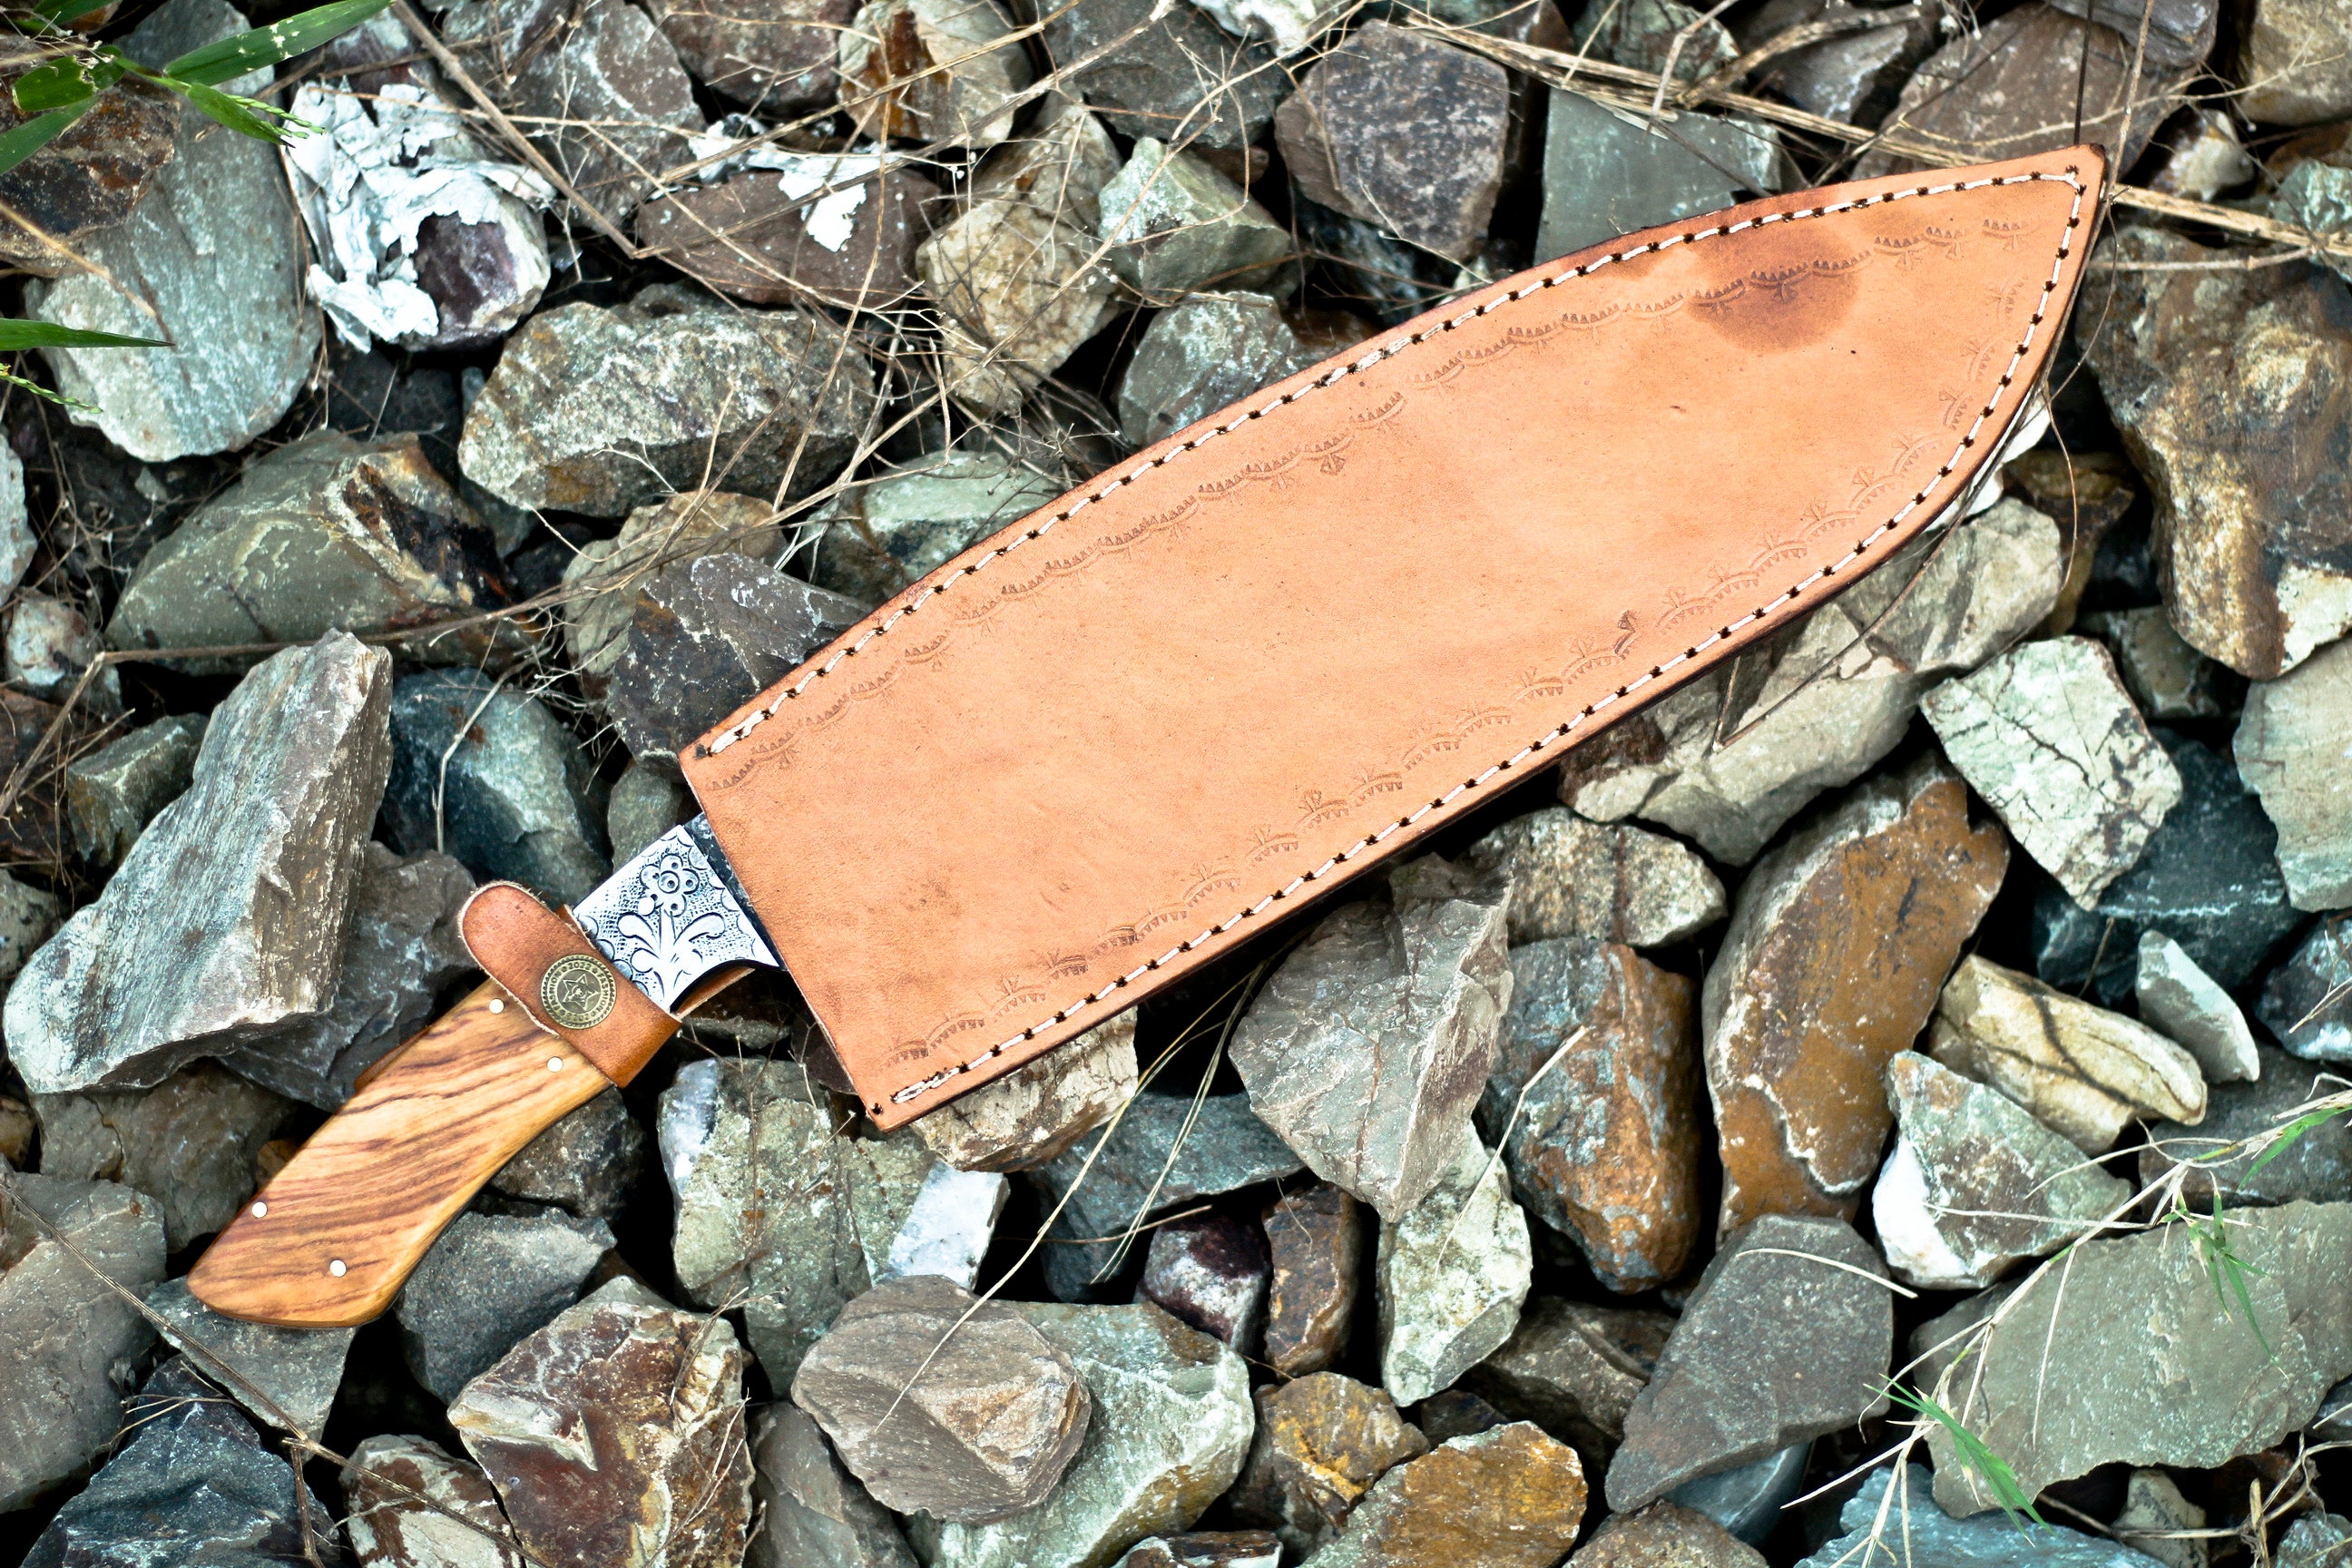 <h3>Custom Handmade Forged Damascus Steel Survival Hunting Bushcraft Kukri Knife EDC 12” With Cocobolo Wood Bull Horn _ Engraved Bolster Handle</h3>